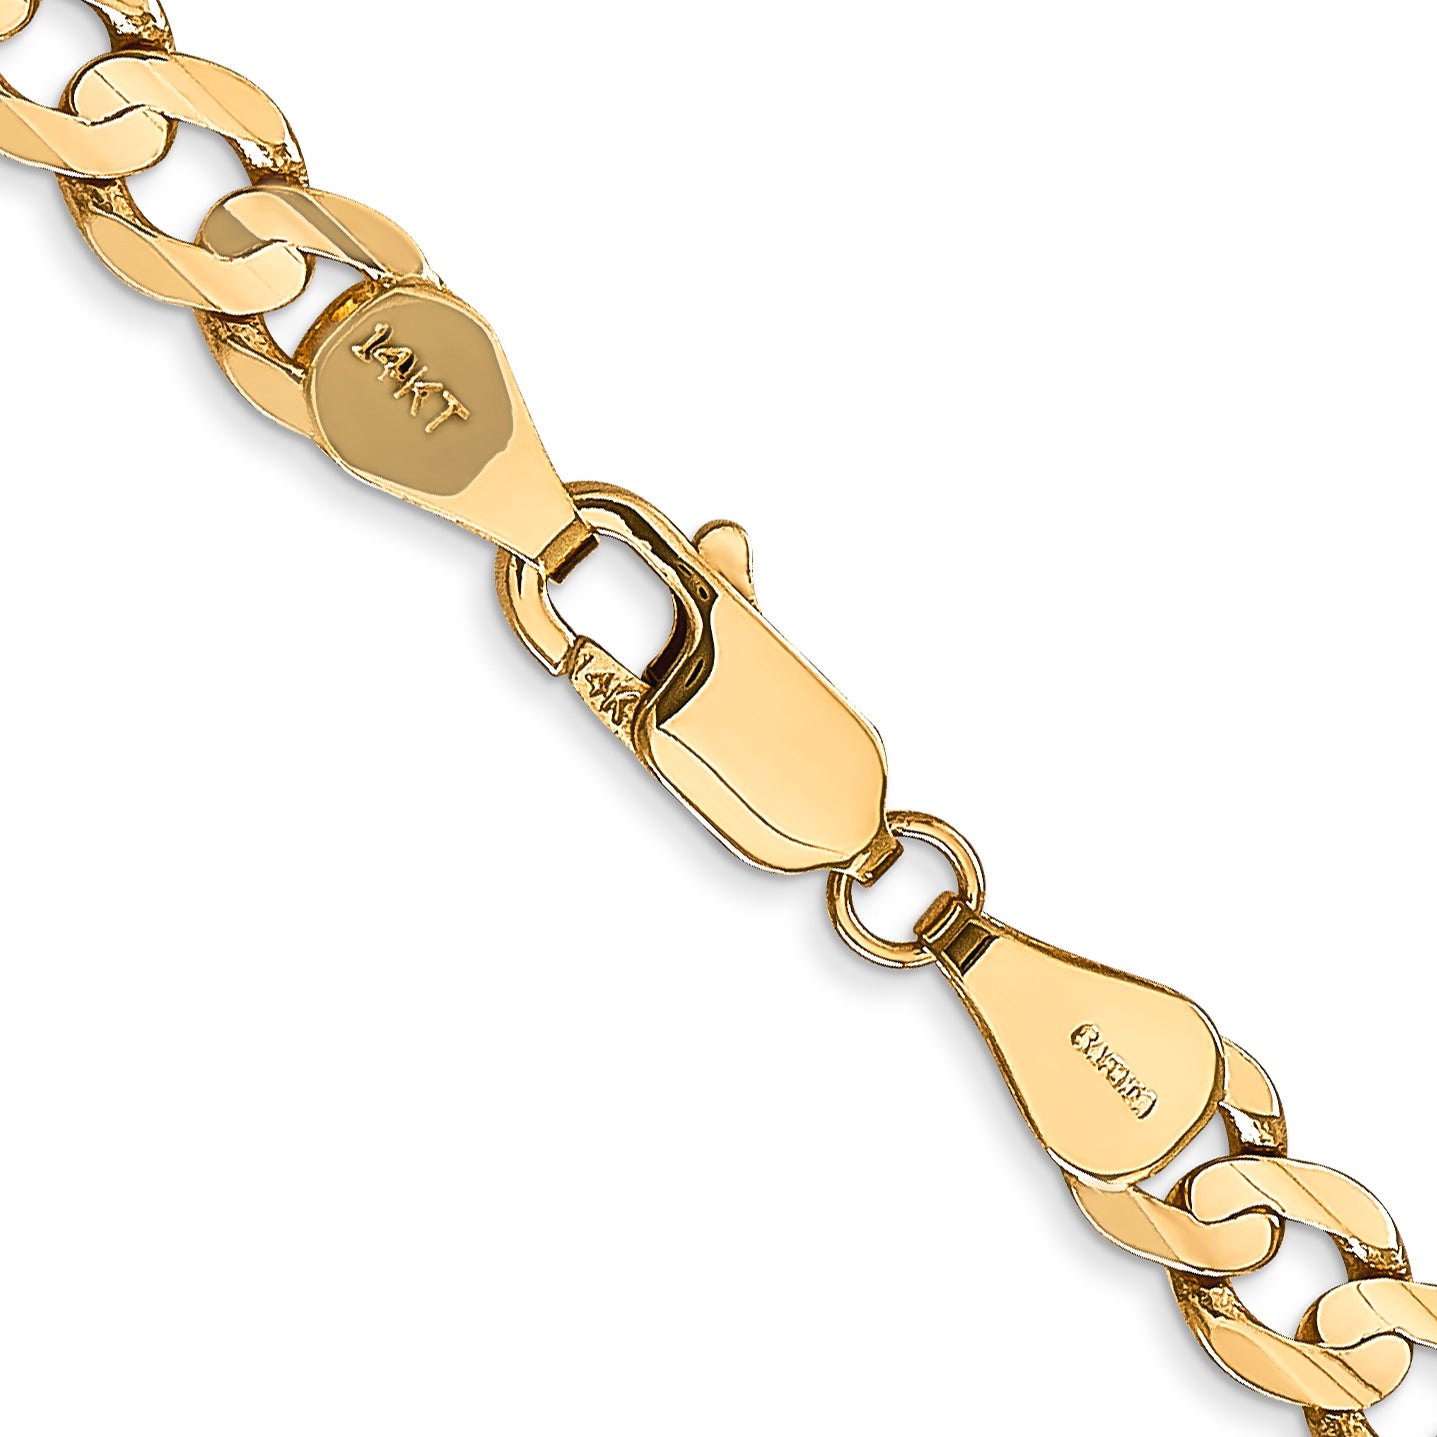 14k 5.25mm Open Concave Curb Chain